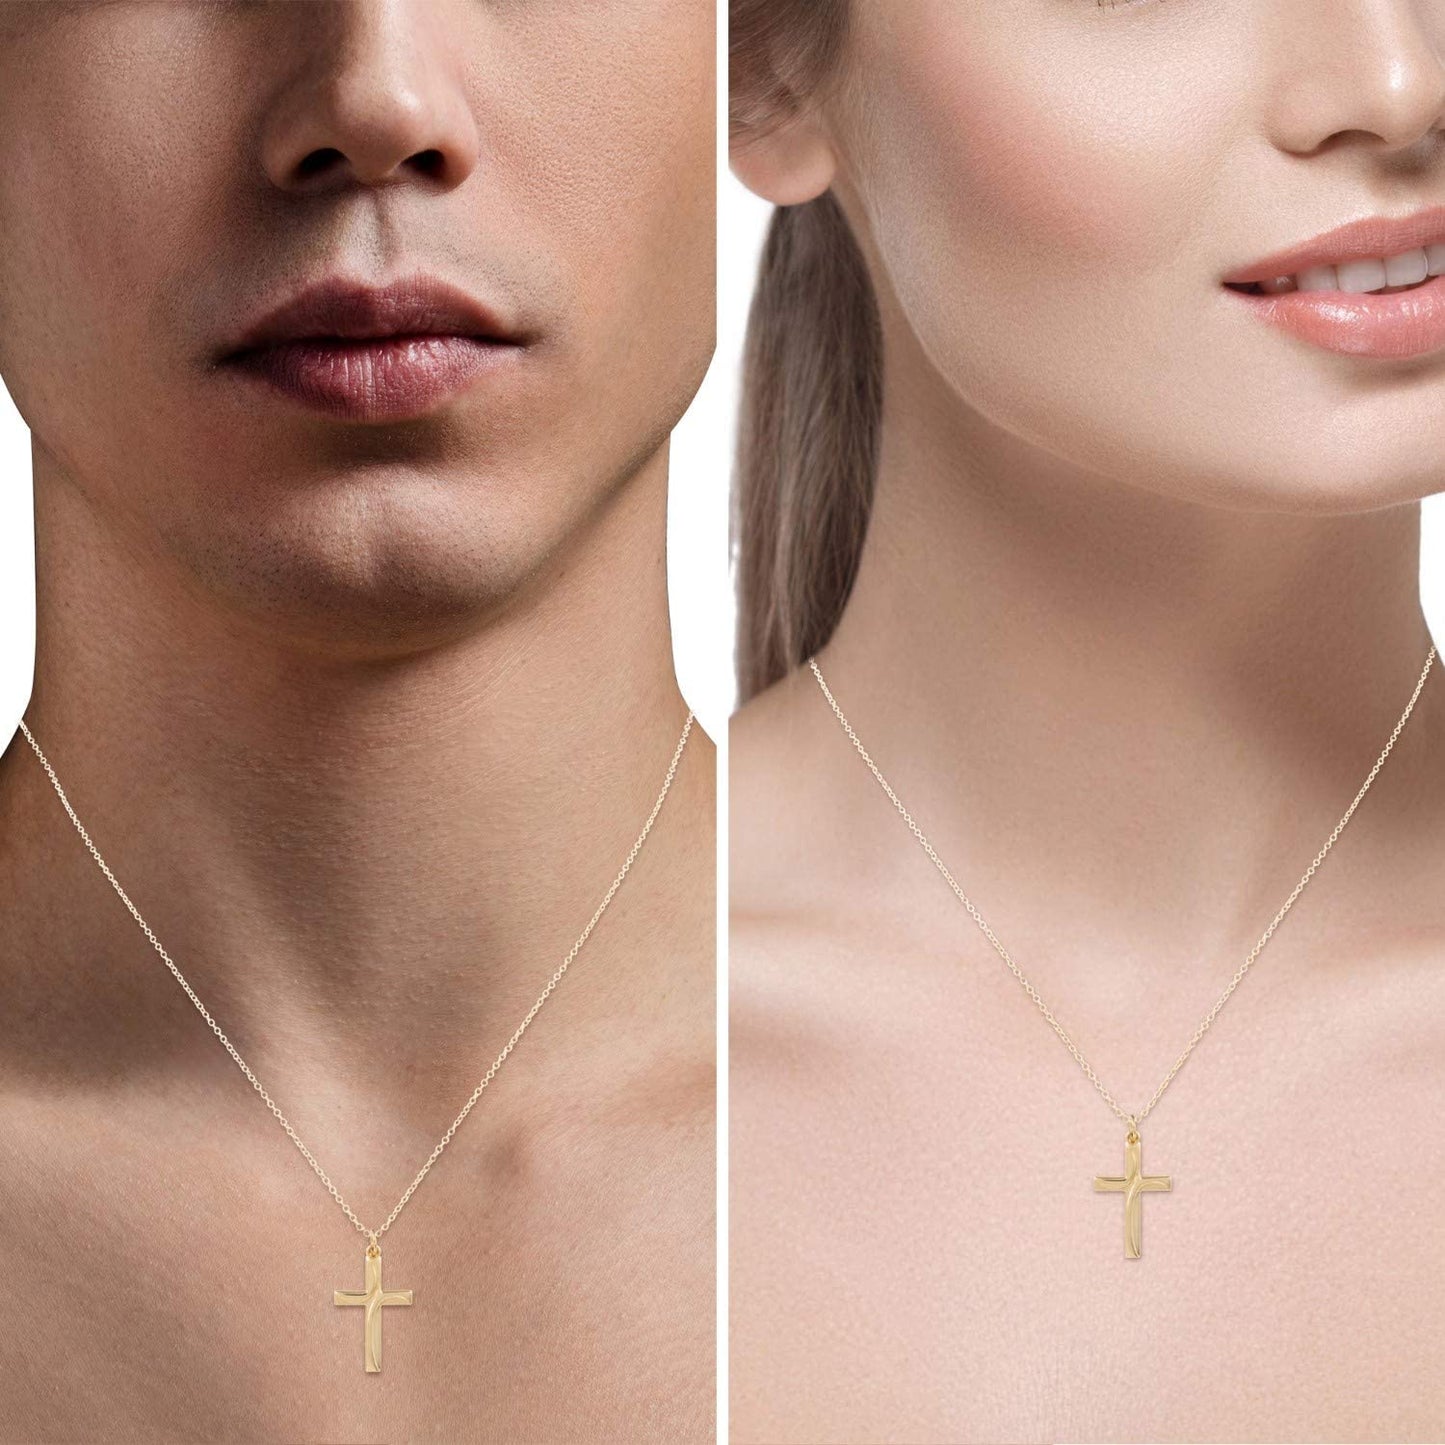 14KT Yellow Gold Cross Religious Pendants/Charms for Men and Women - Available in Various Designs